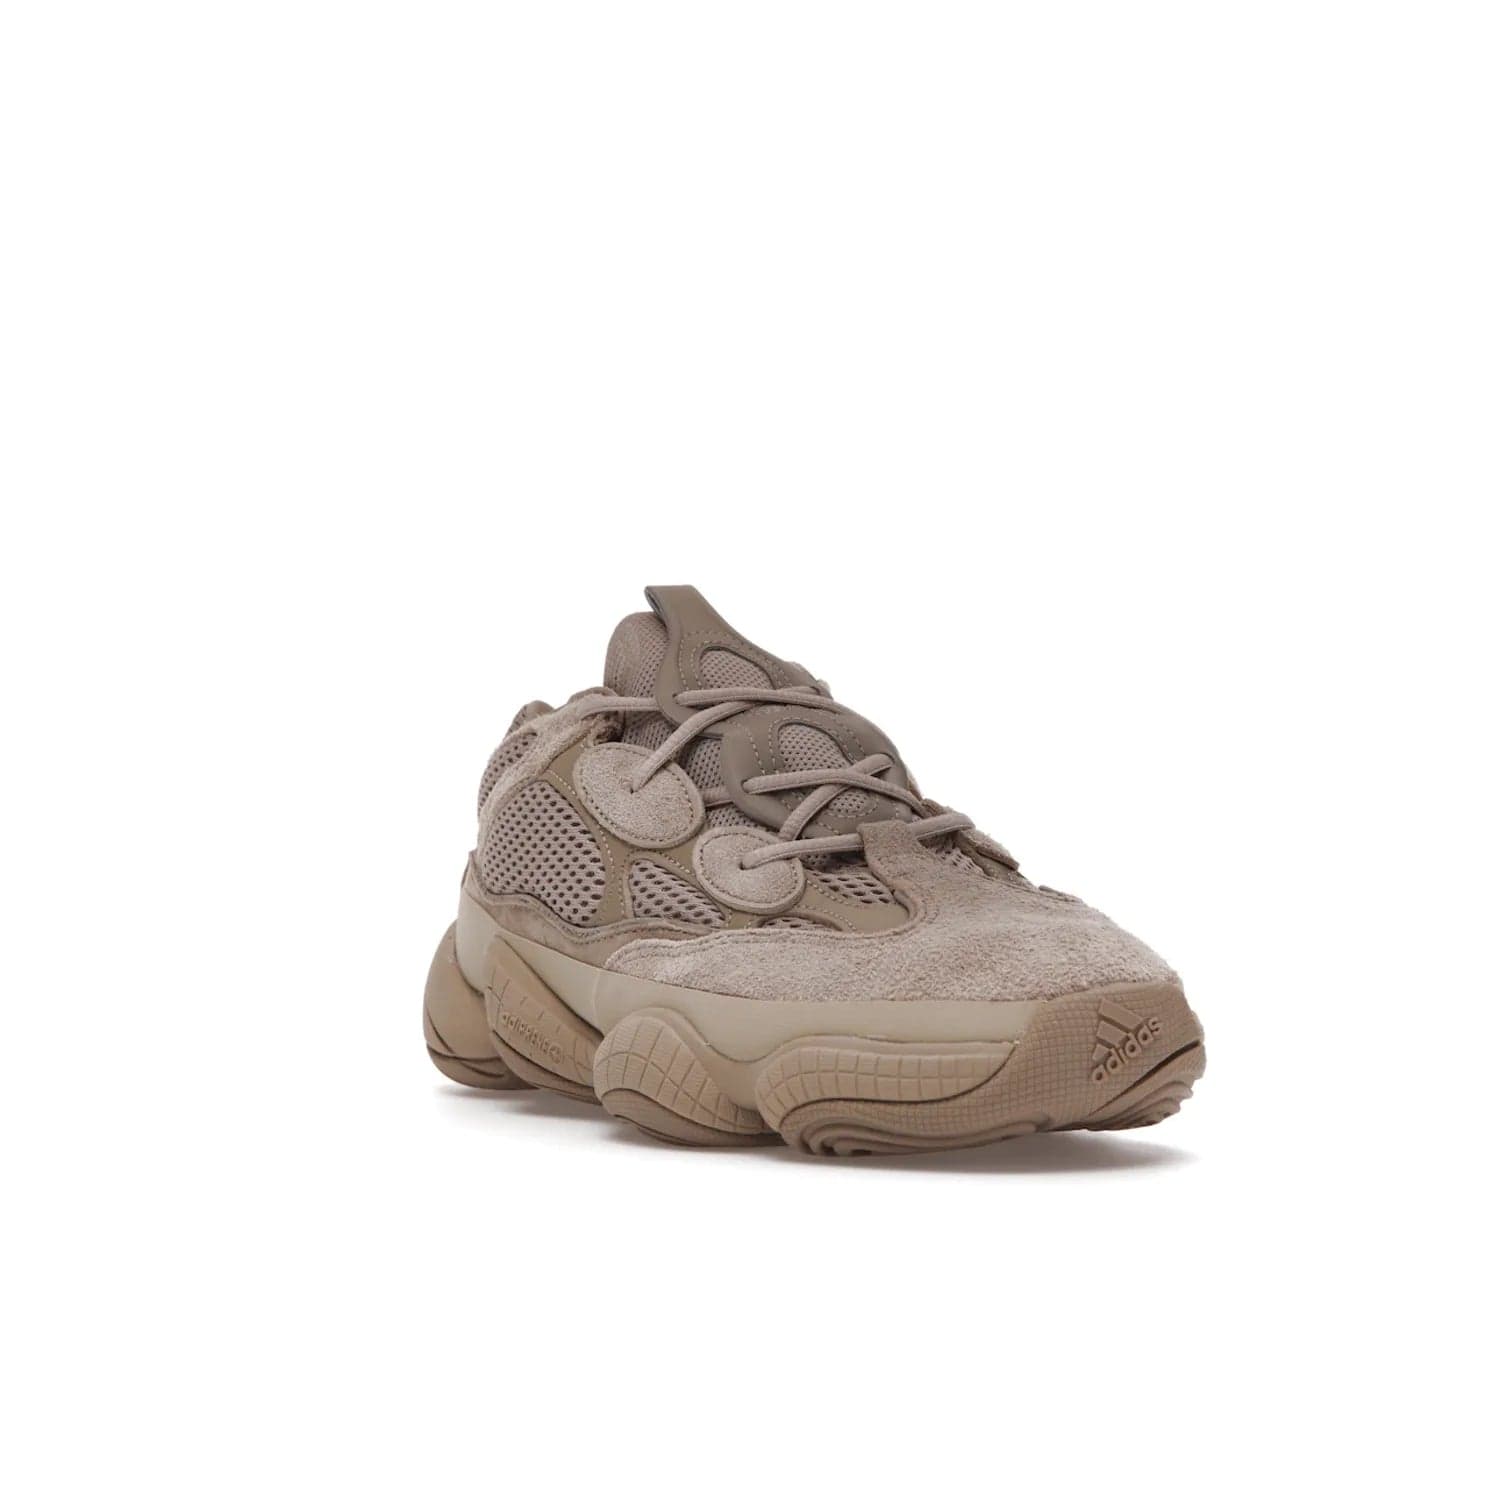 adidas Yeezy 500 Taupe Light - Image 7 - Only at www.BallersClubKickz.com - The adidas Yeezy 500 Taupe Light combines mesh, leather, and suede, with a durable adiPRENE sole for an eye-catching accessory. Reflective piping adds the perfect finishing touches to this unique silhouette. Ideal for any wardrobe, releasing in June 2021.